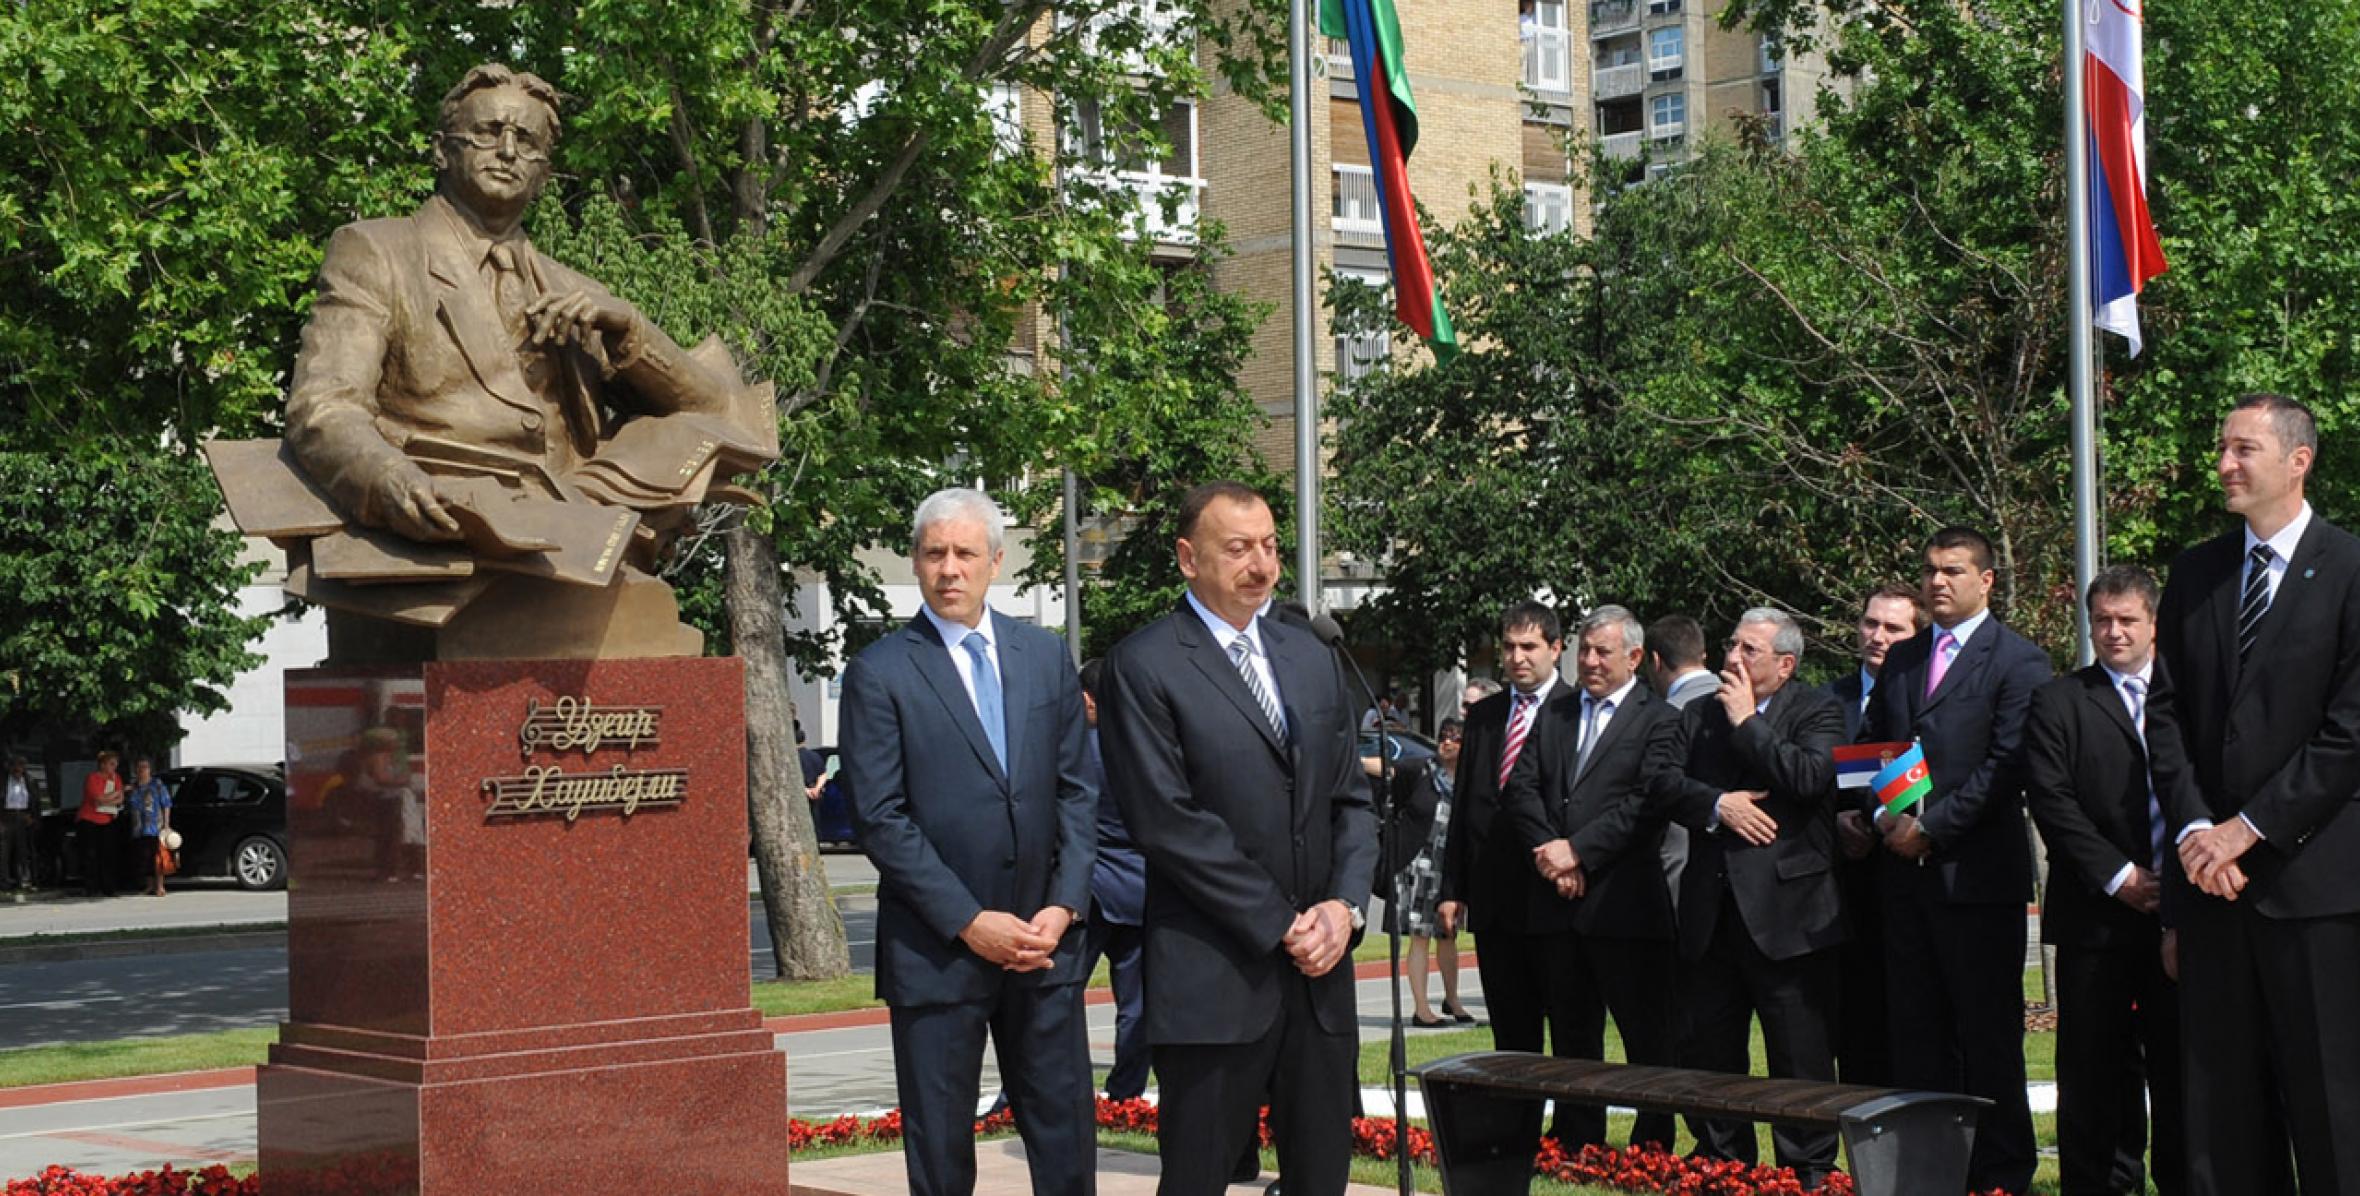 Speech by Ilham Aliyev in the bust-unveiling ceremony to outstanding Azerbaijani composer Uzeyir Hajibayli in the town of Novi Sad.